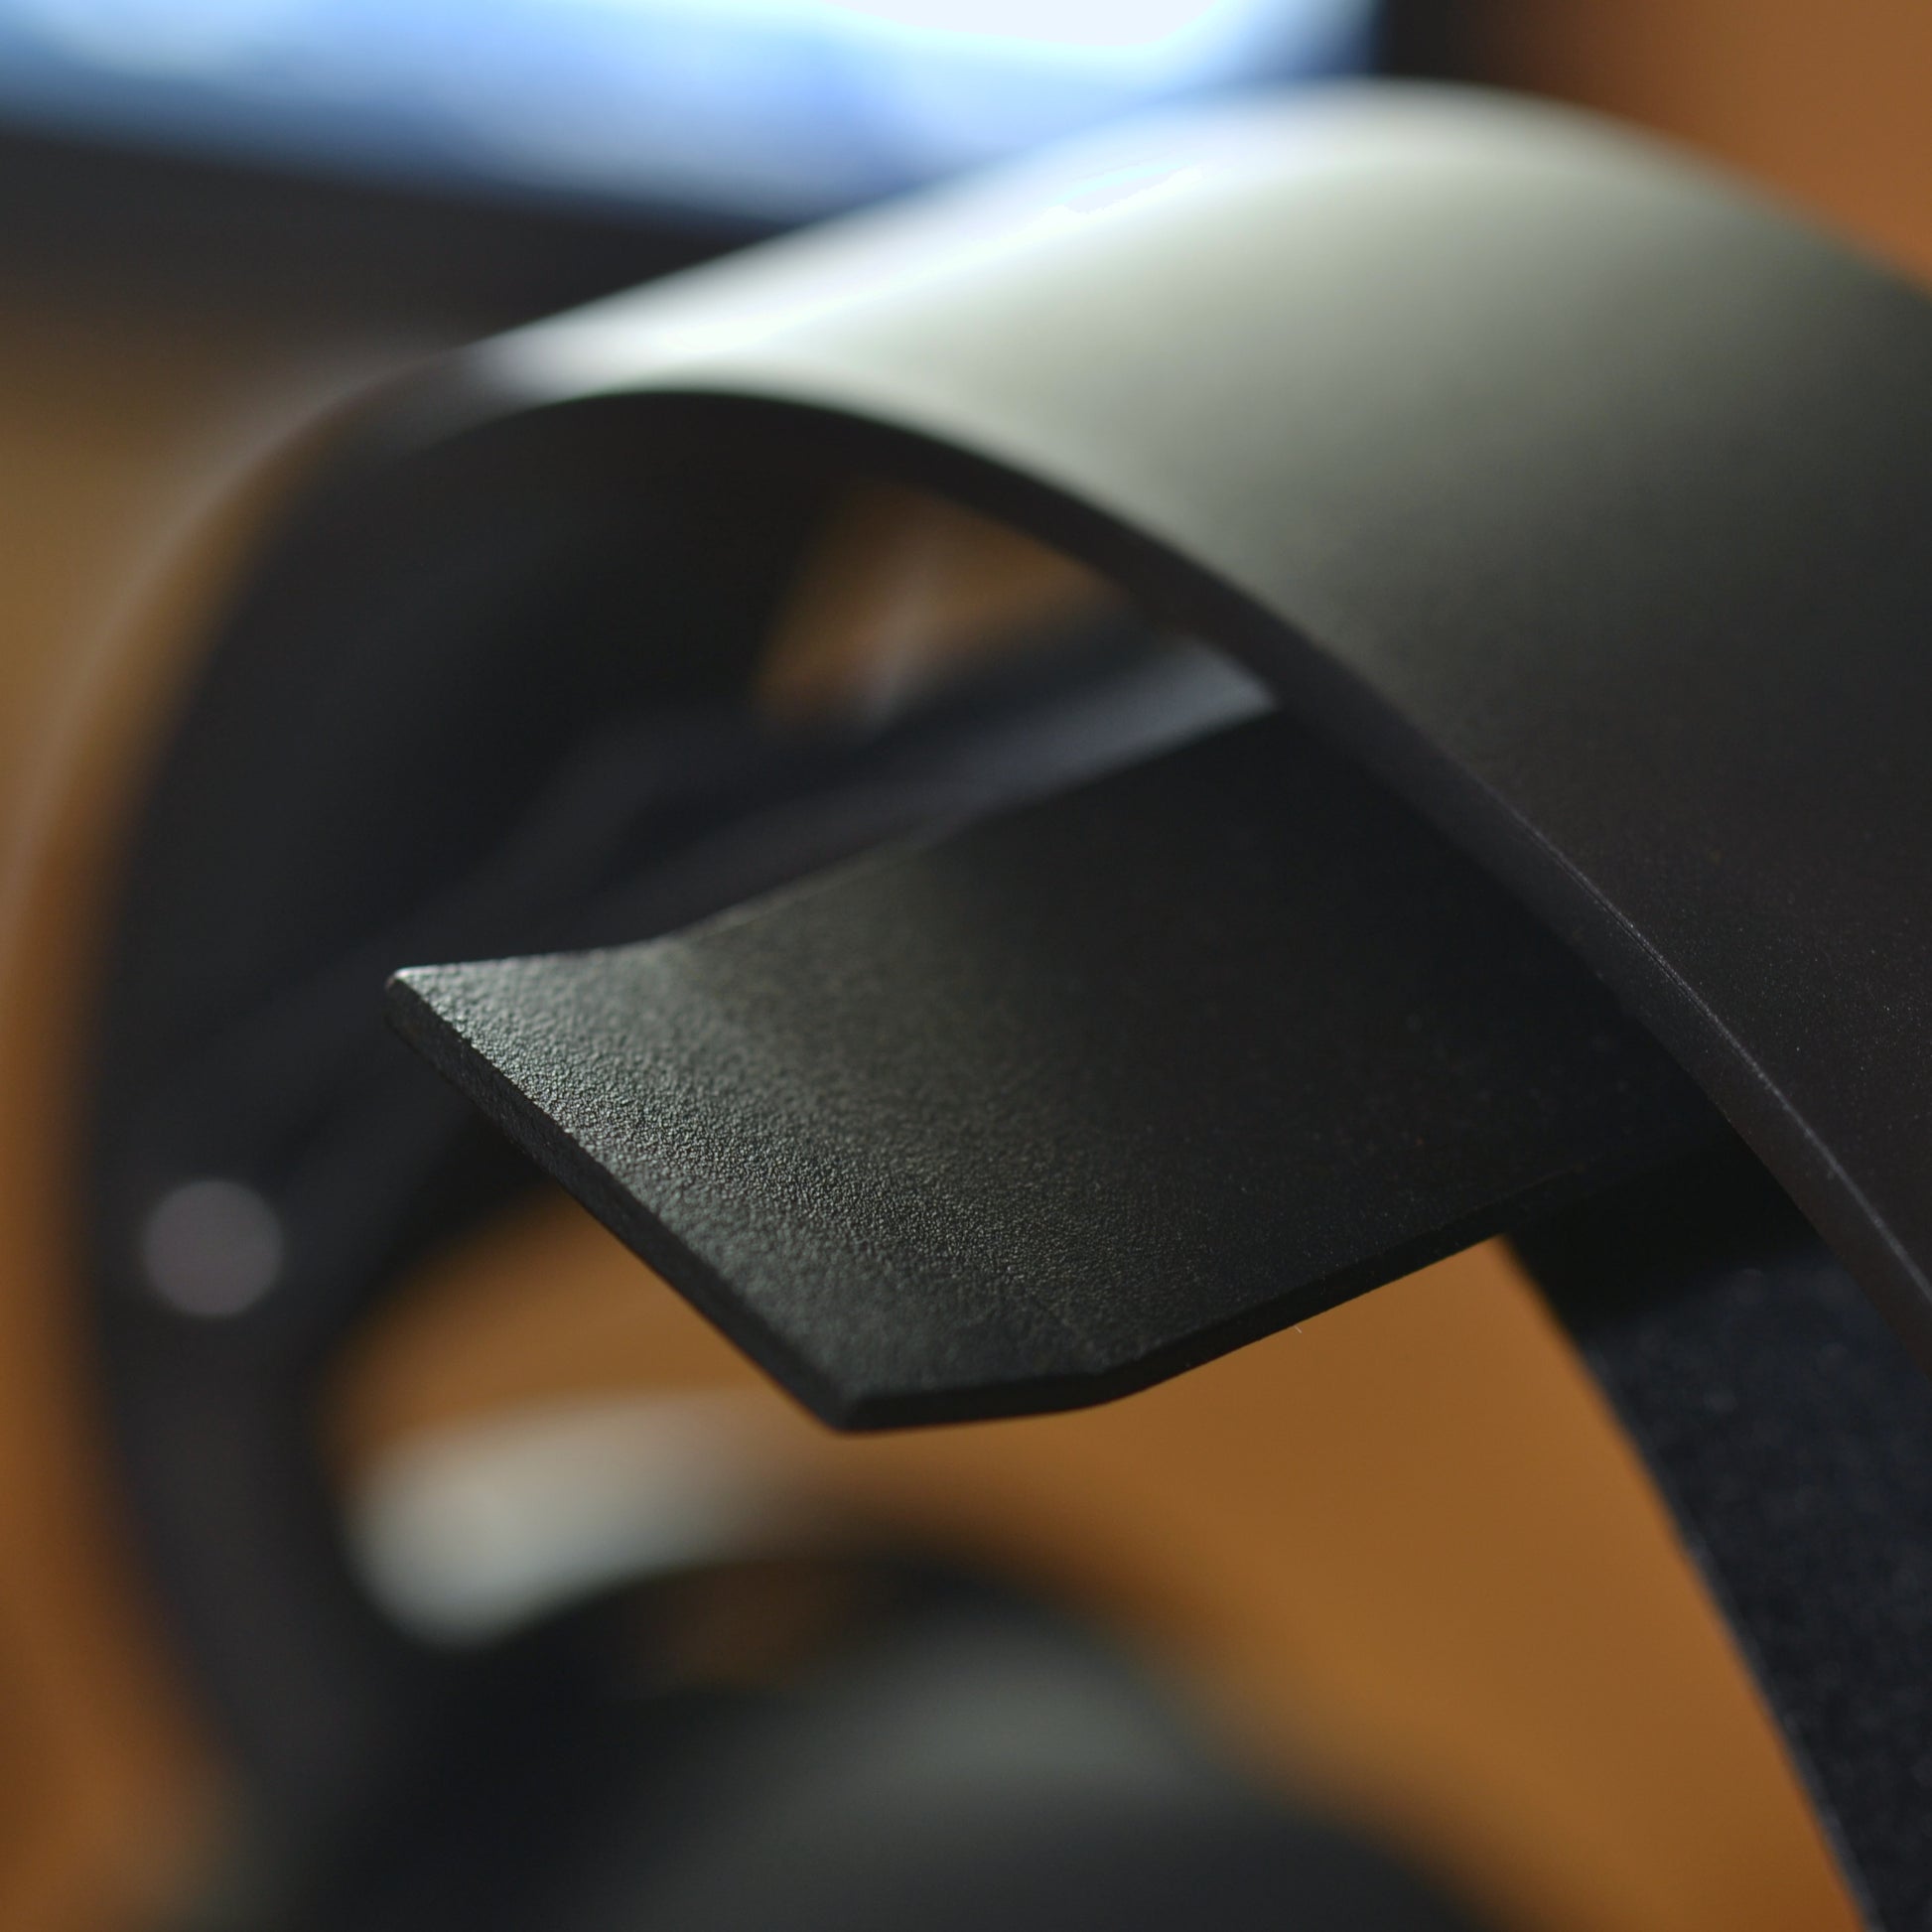 Close up detail of headset and controller stand for Xbox series X|S Controller